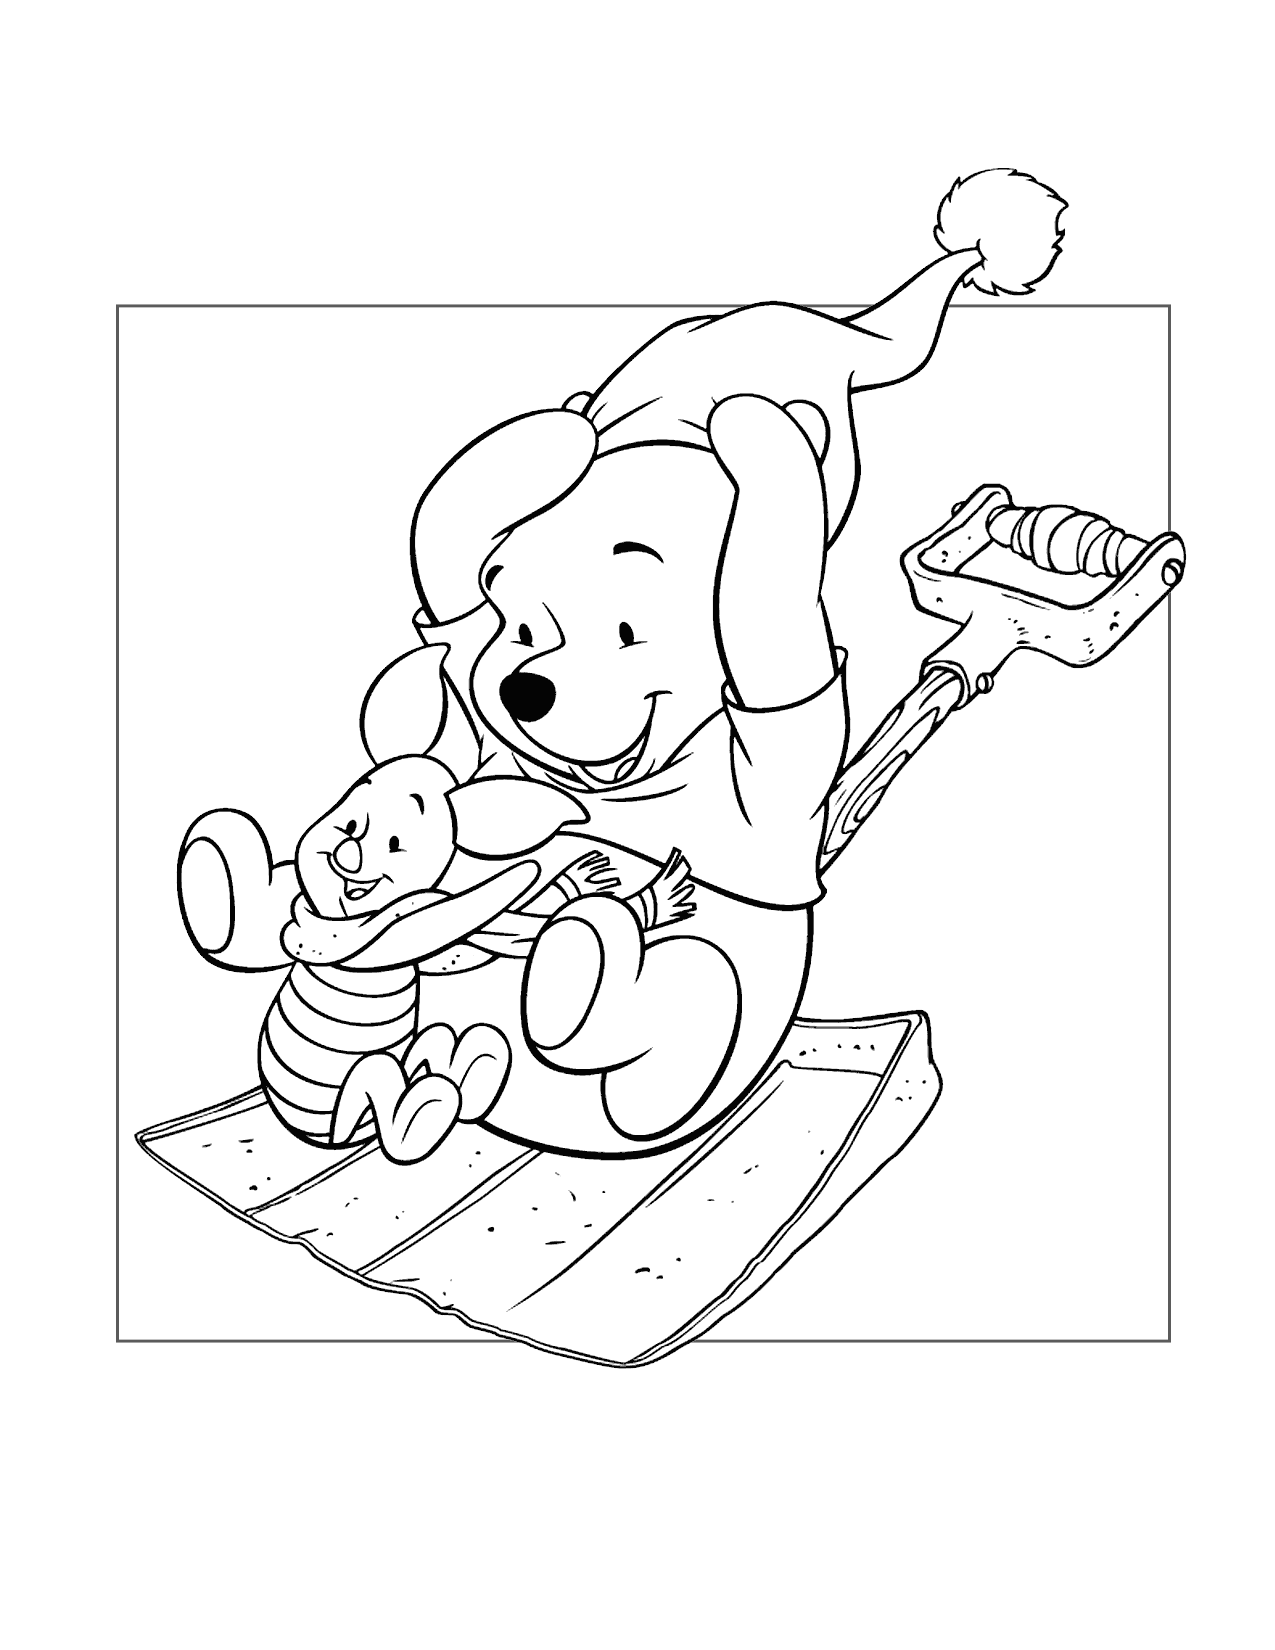 Pooh And Piglet Go Sledding Coloring Page